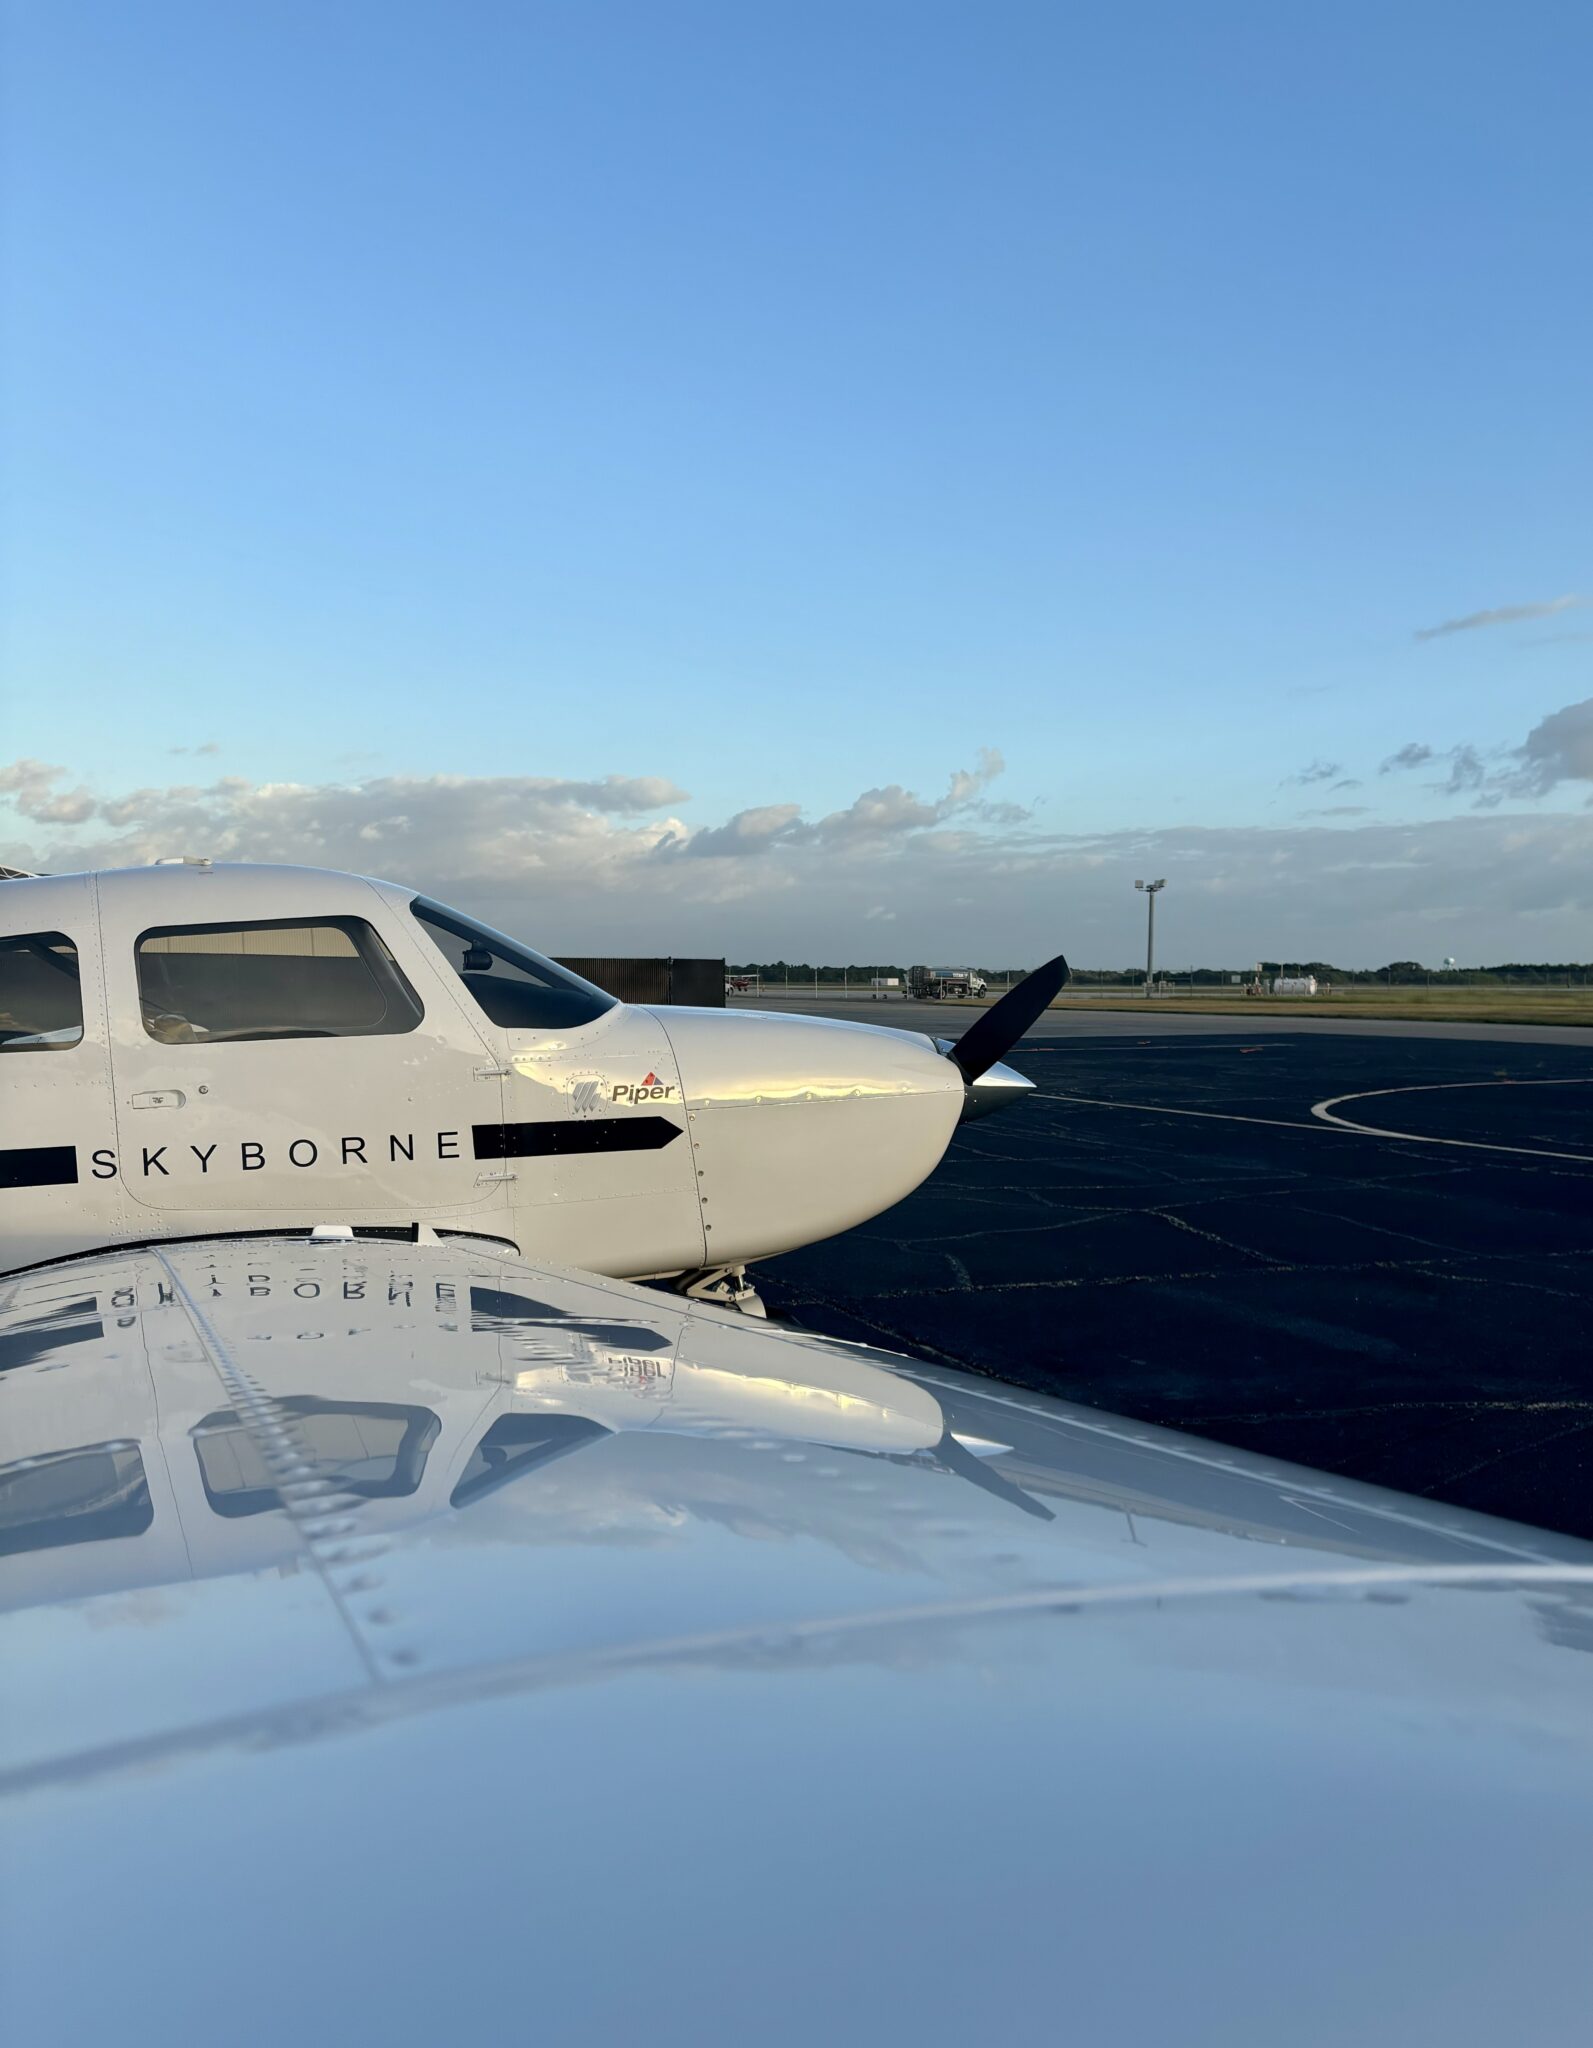 Skyborne Signs Deal with Piper for 11 Pilot 100i Aircraft